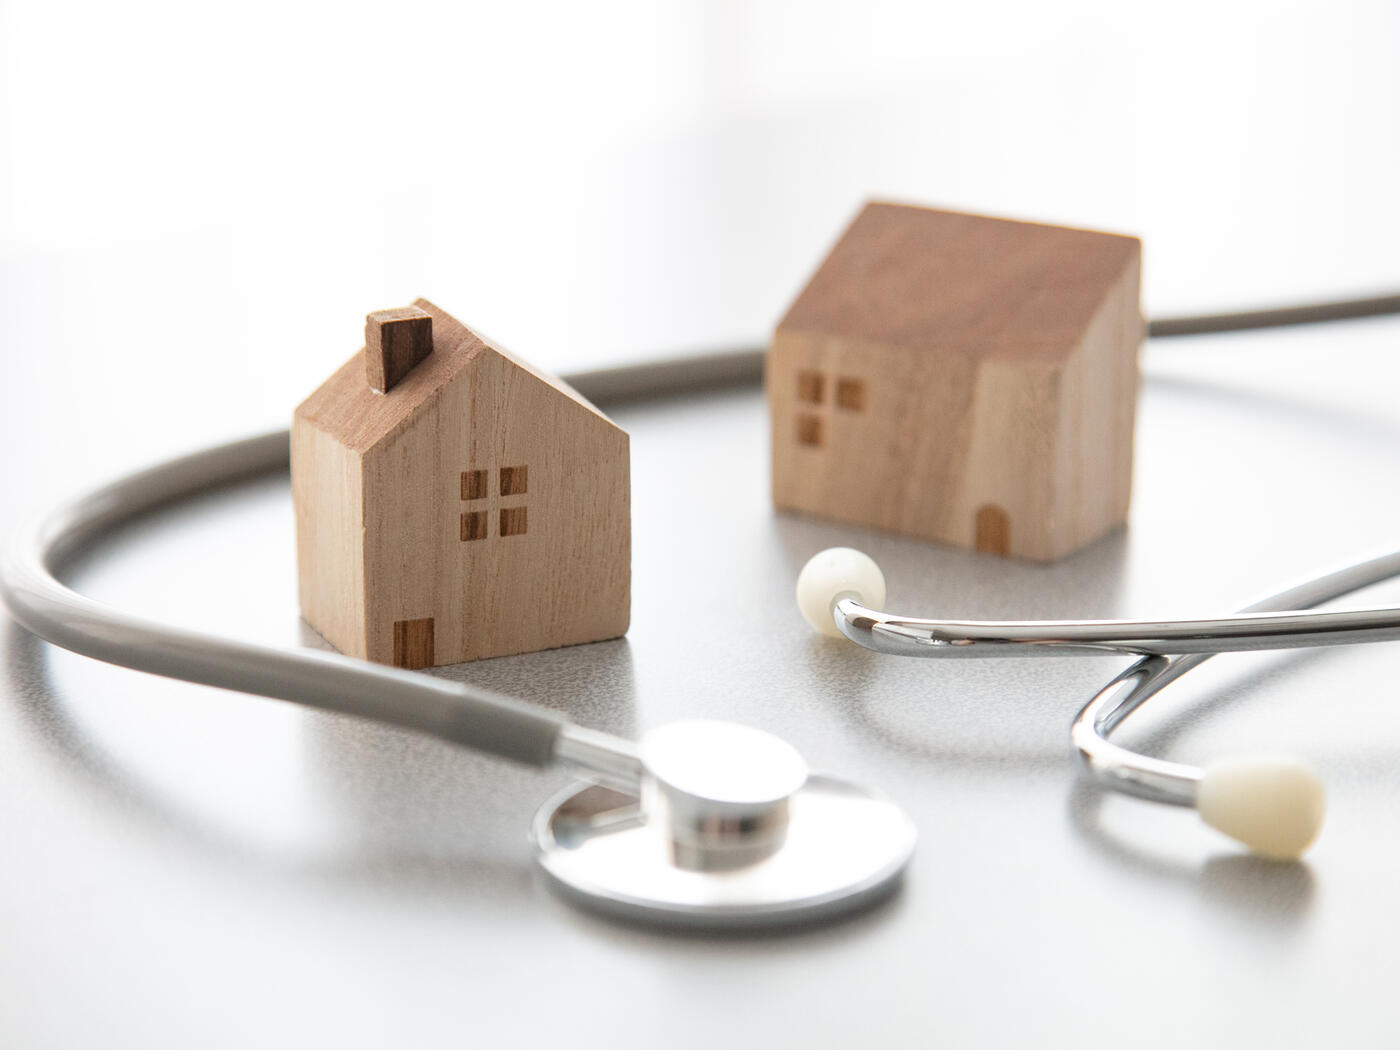 Two mini wooden house figurines with a regular sized stethoscope wrapped around them on smooth white surface